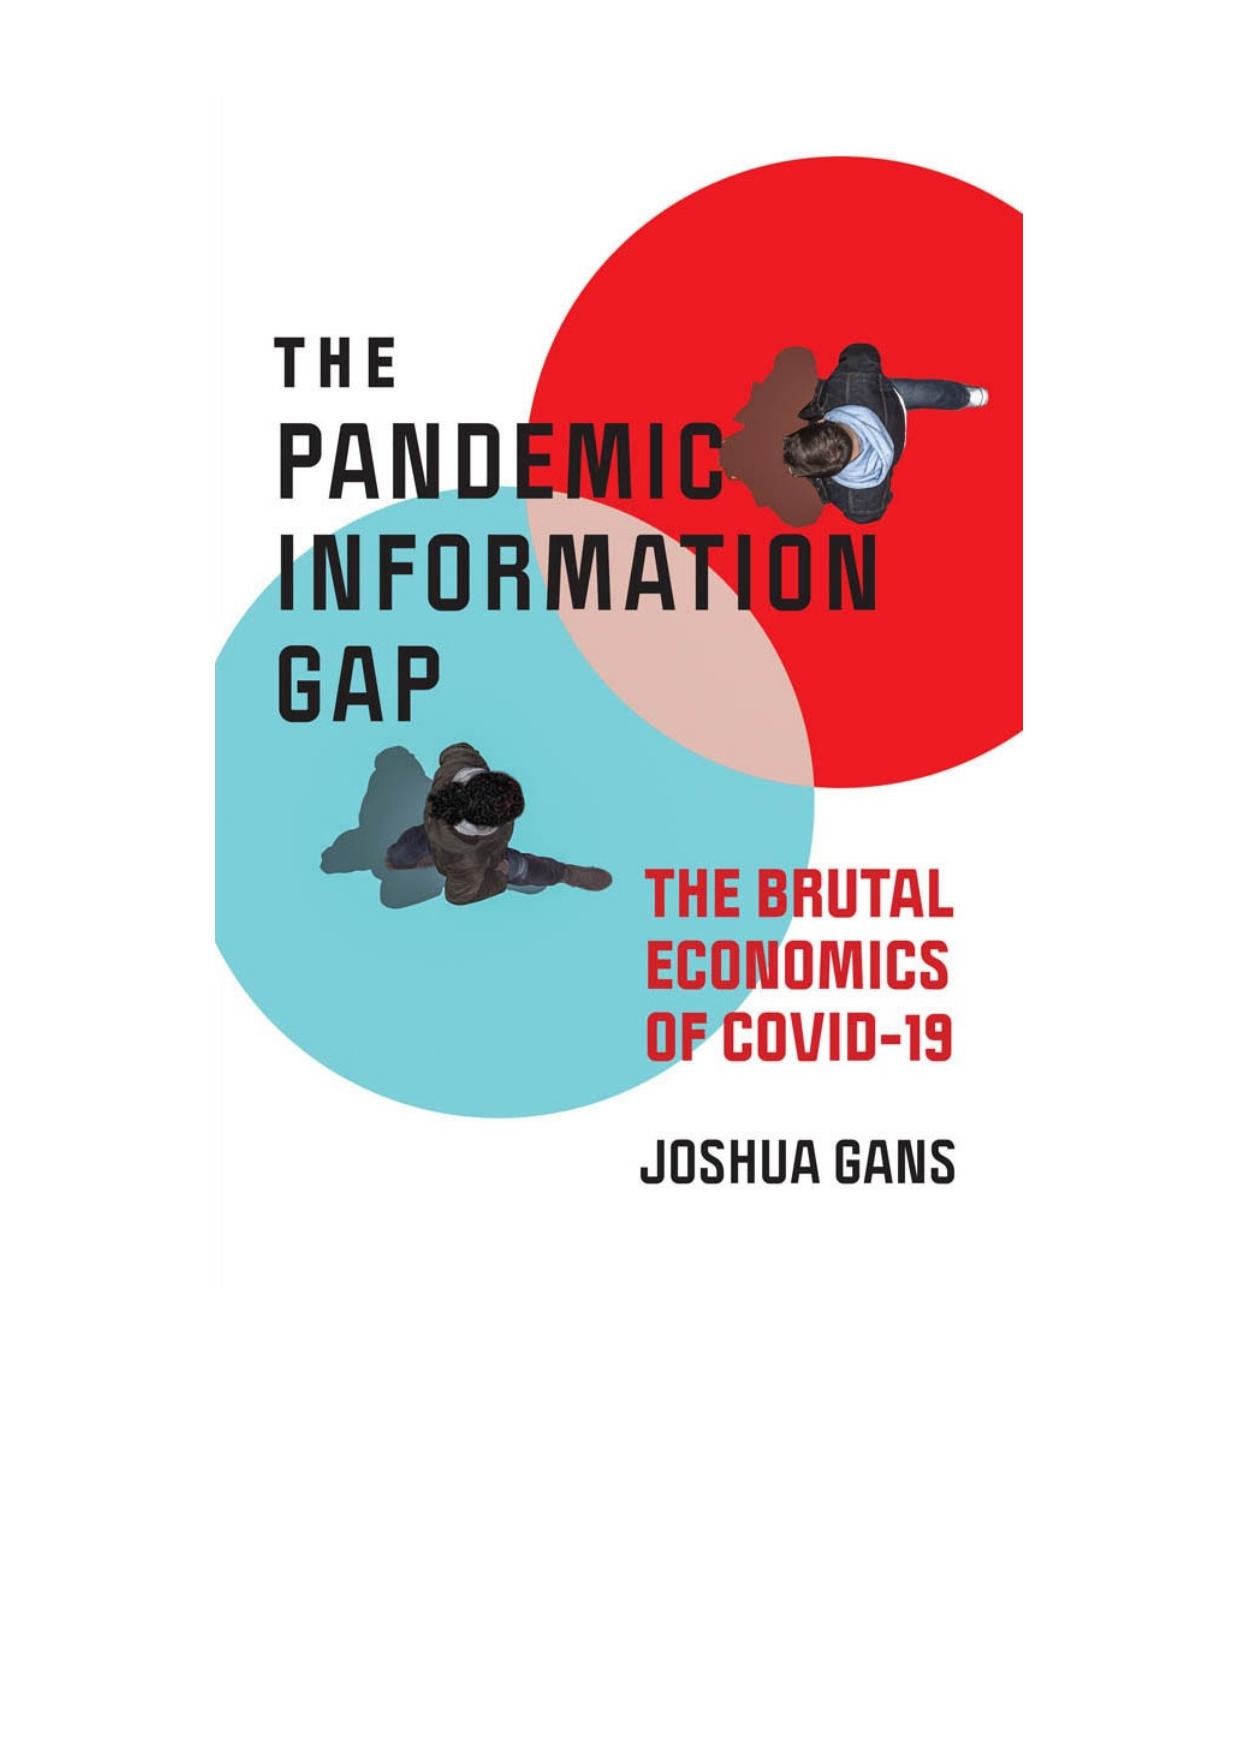 The Pandemic Information Gap: The Brutal Economics of COVID-19